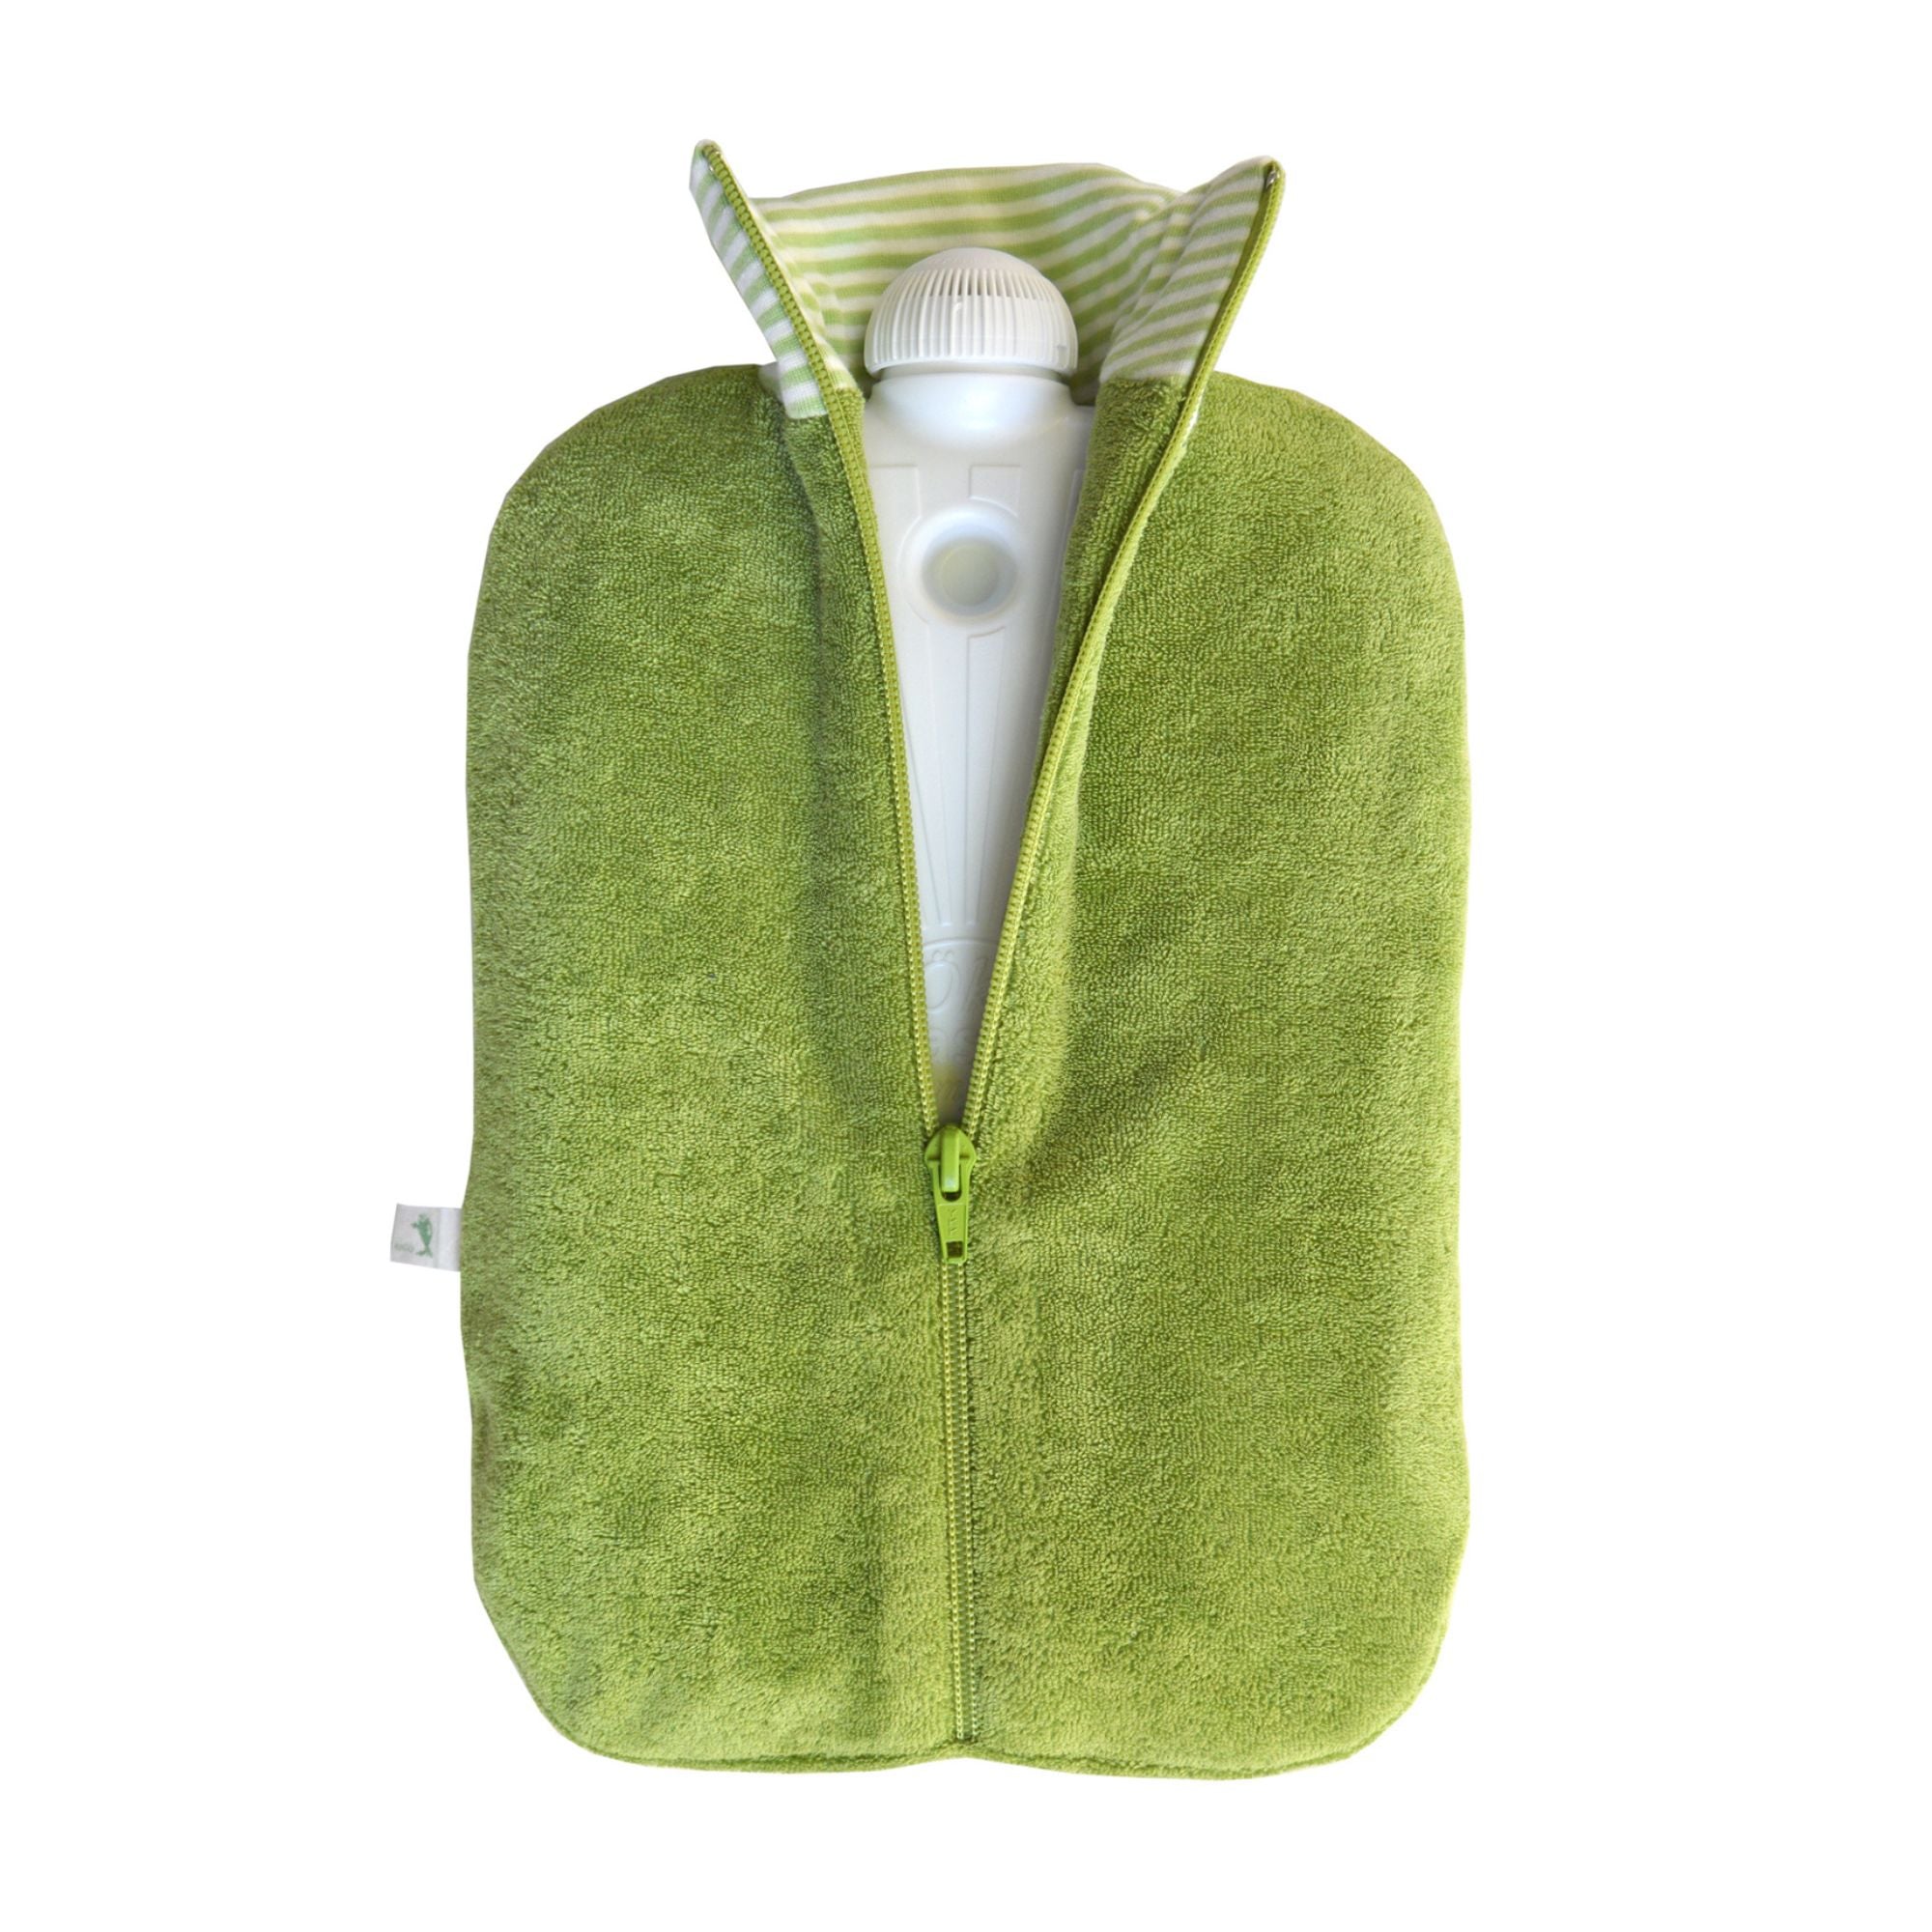 2 Litre Eco Hot Water Bottle with Kiwi Green Organic Cotton Cover (rubberless)